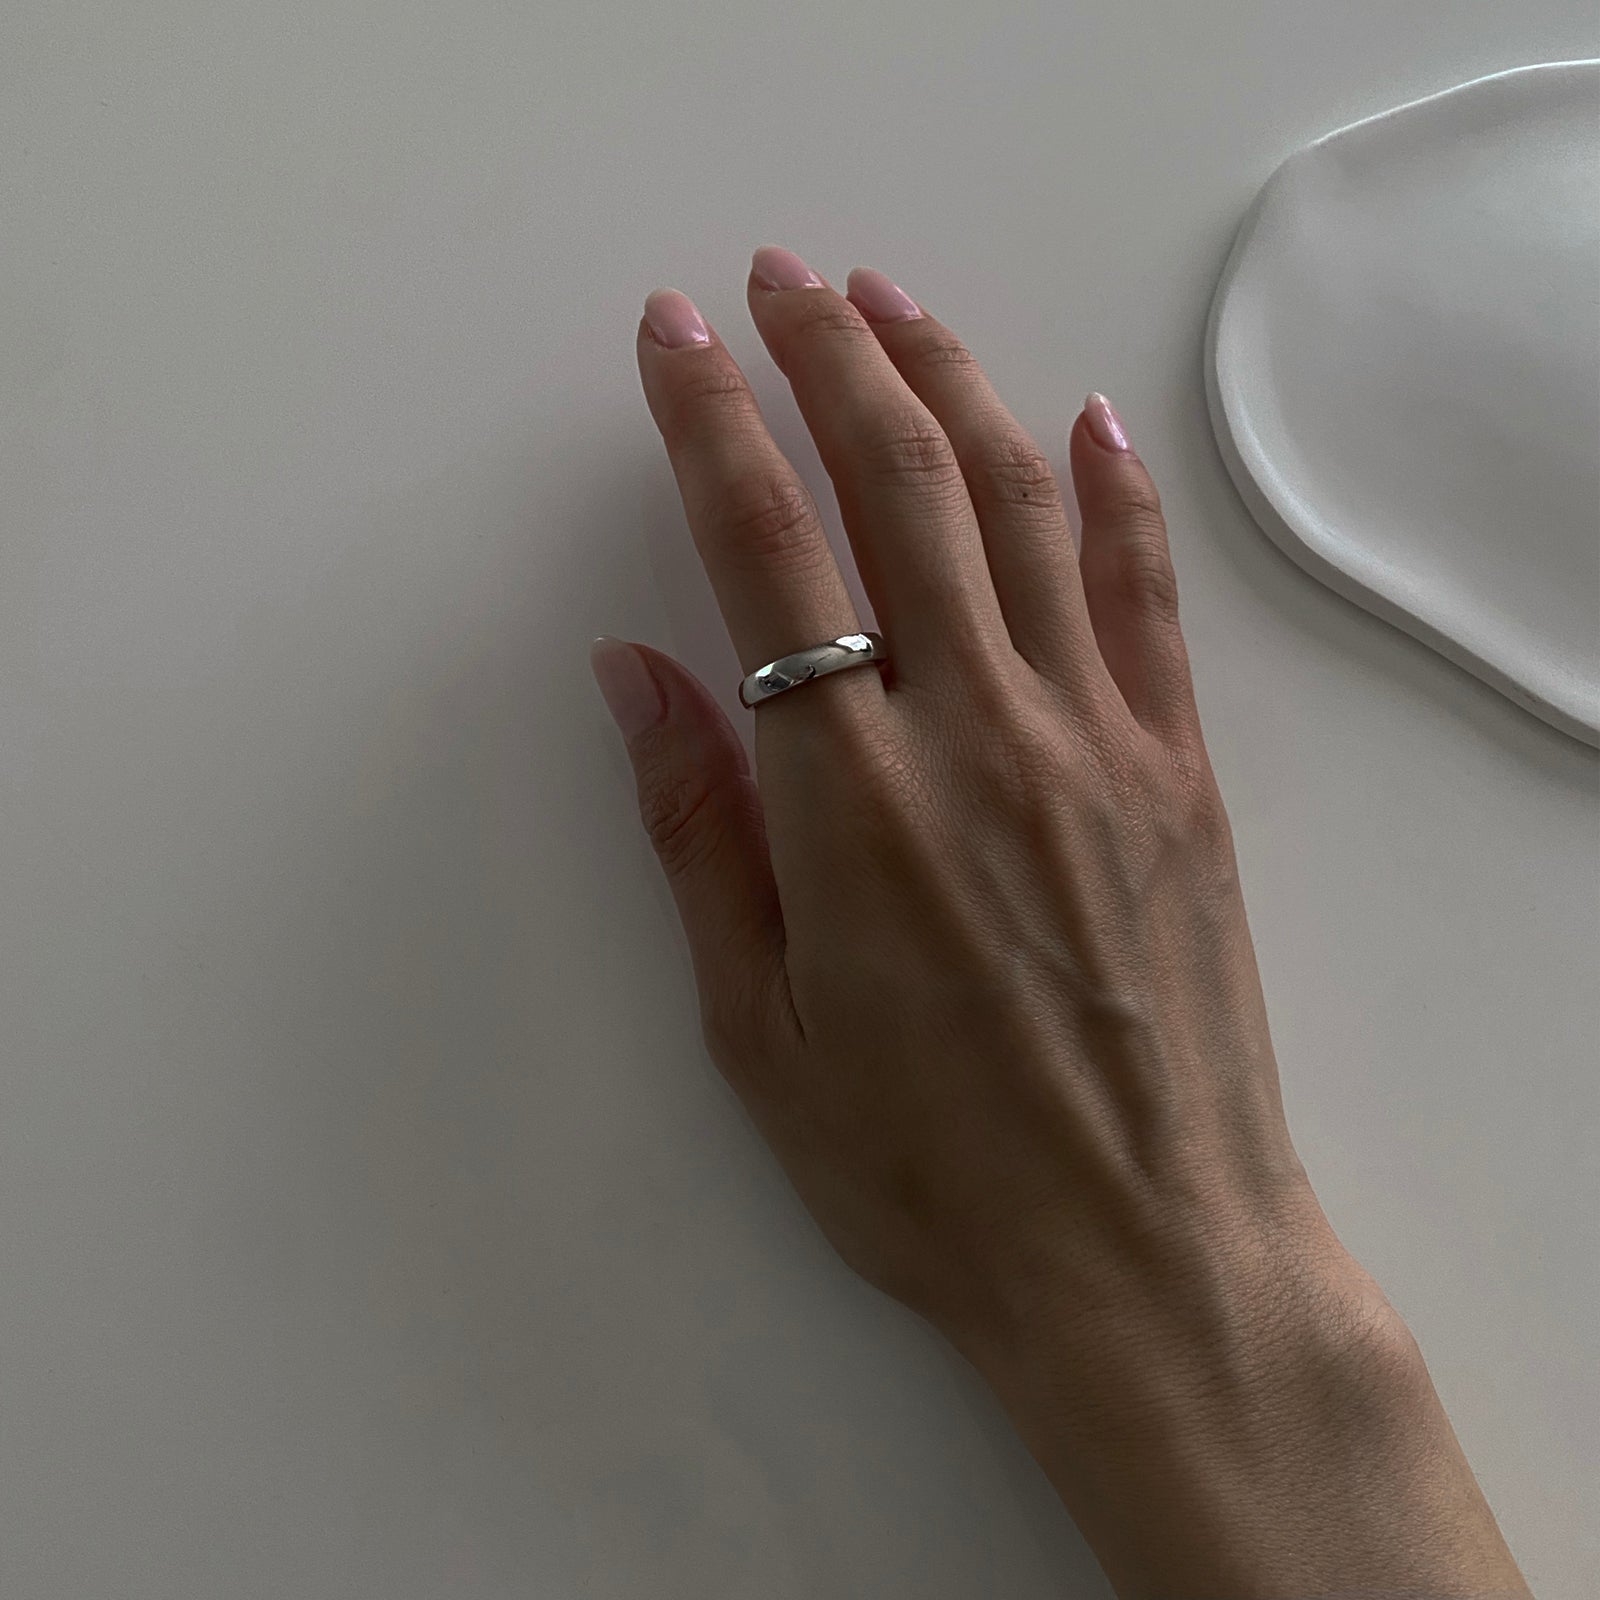 Simple classic band ring made of 925 sterling silver with rhodium plating for extra strength. The ring is adjustable and can fit most sizes 5-9 approximately. Perfect ring for everyday and looks great layered. 